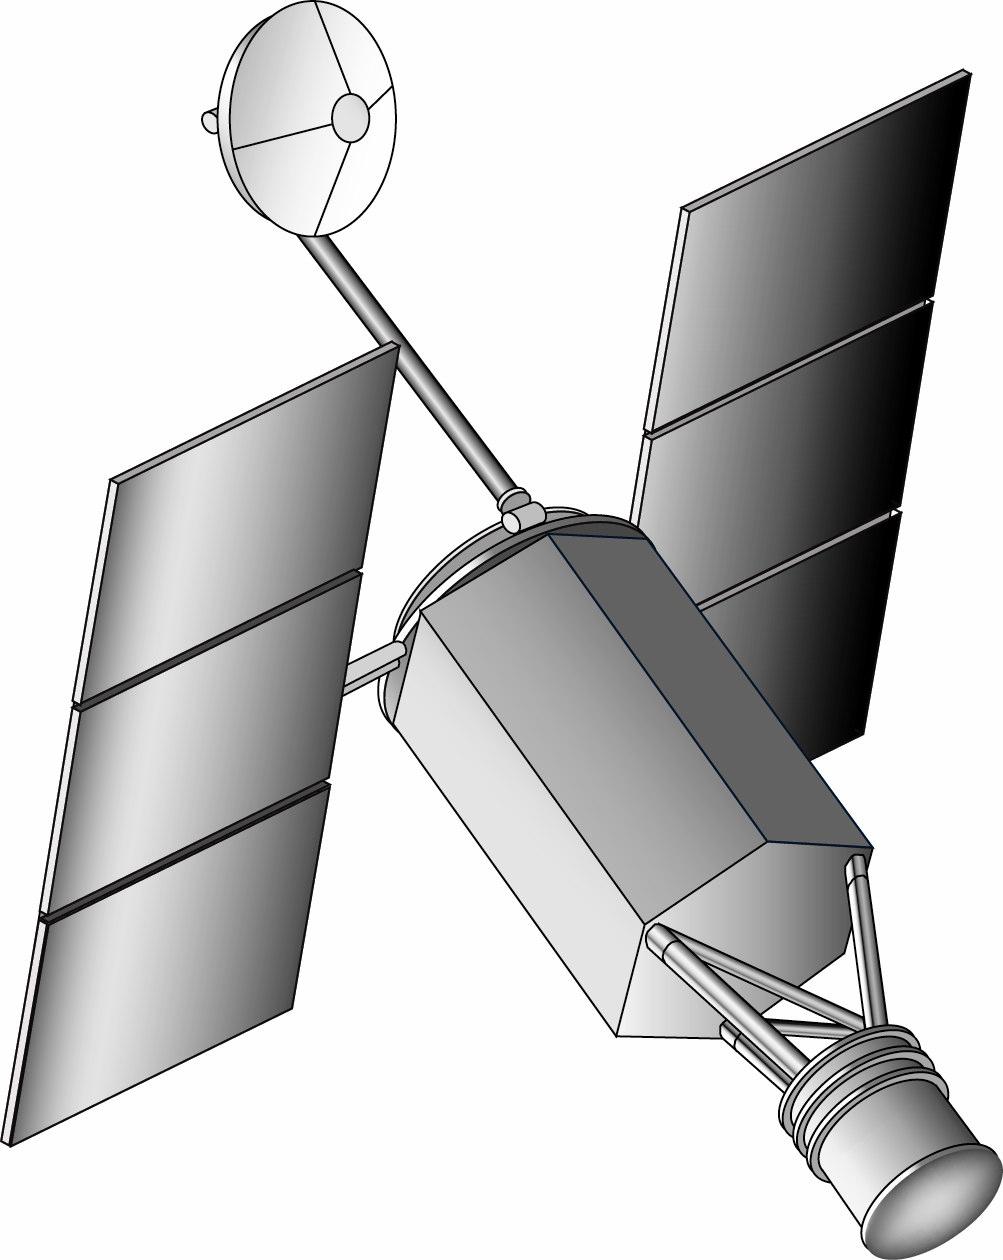 What Are the Functions of the Spacecraft Structure? Physically support spacecraft equipment Maintain align